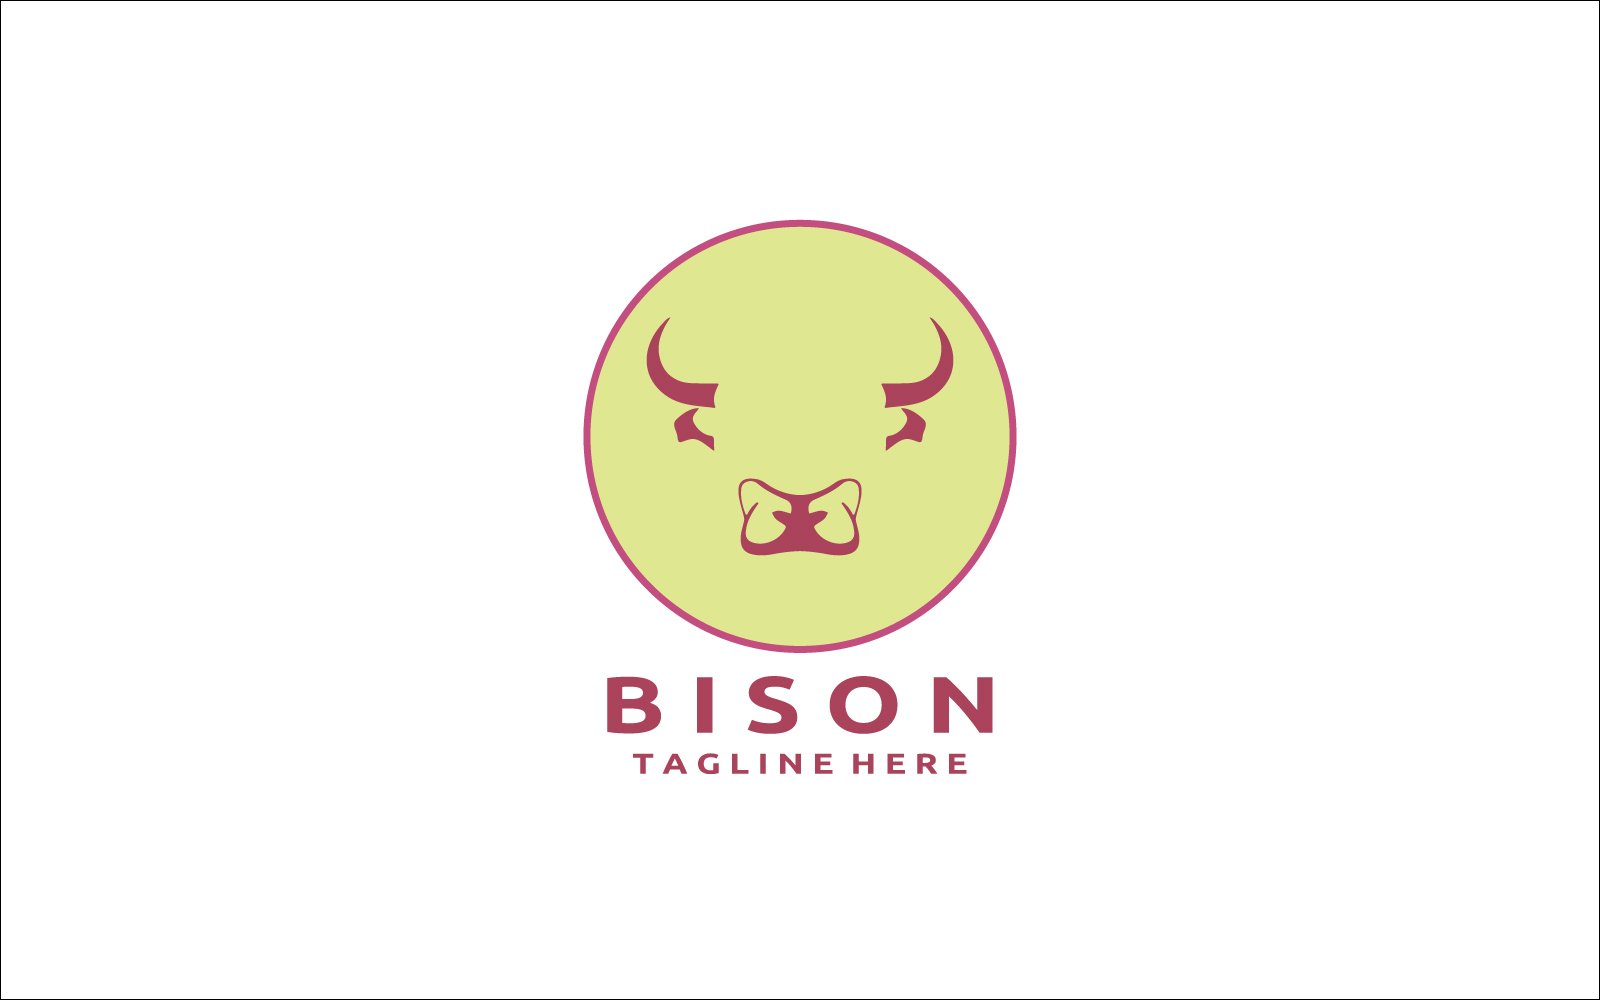 Template #381897 Logo Bison Webdesign Template - Logo template Preview